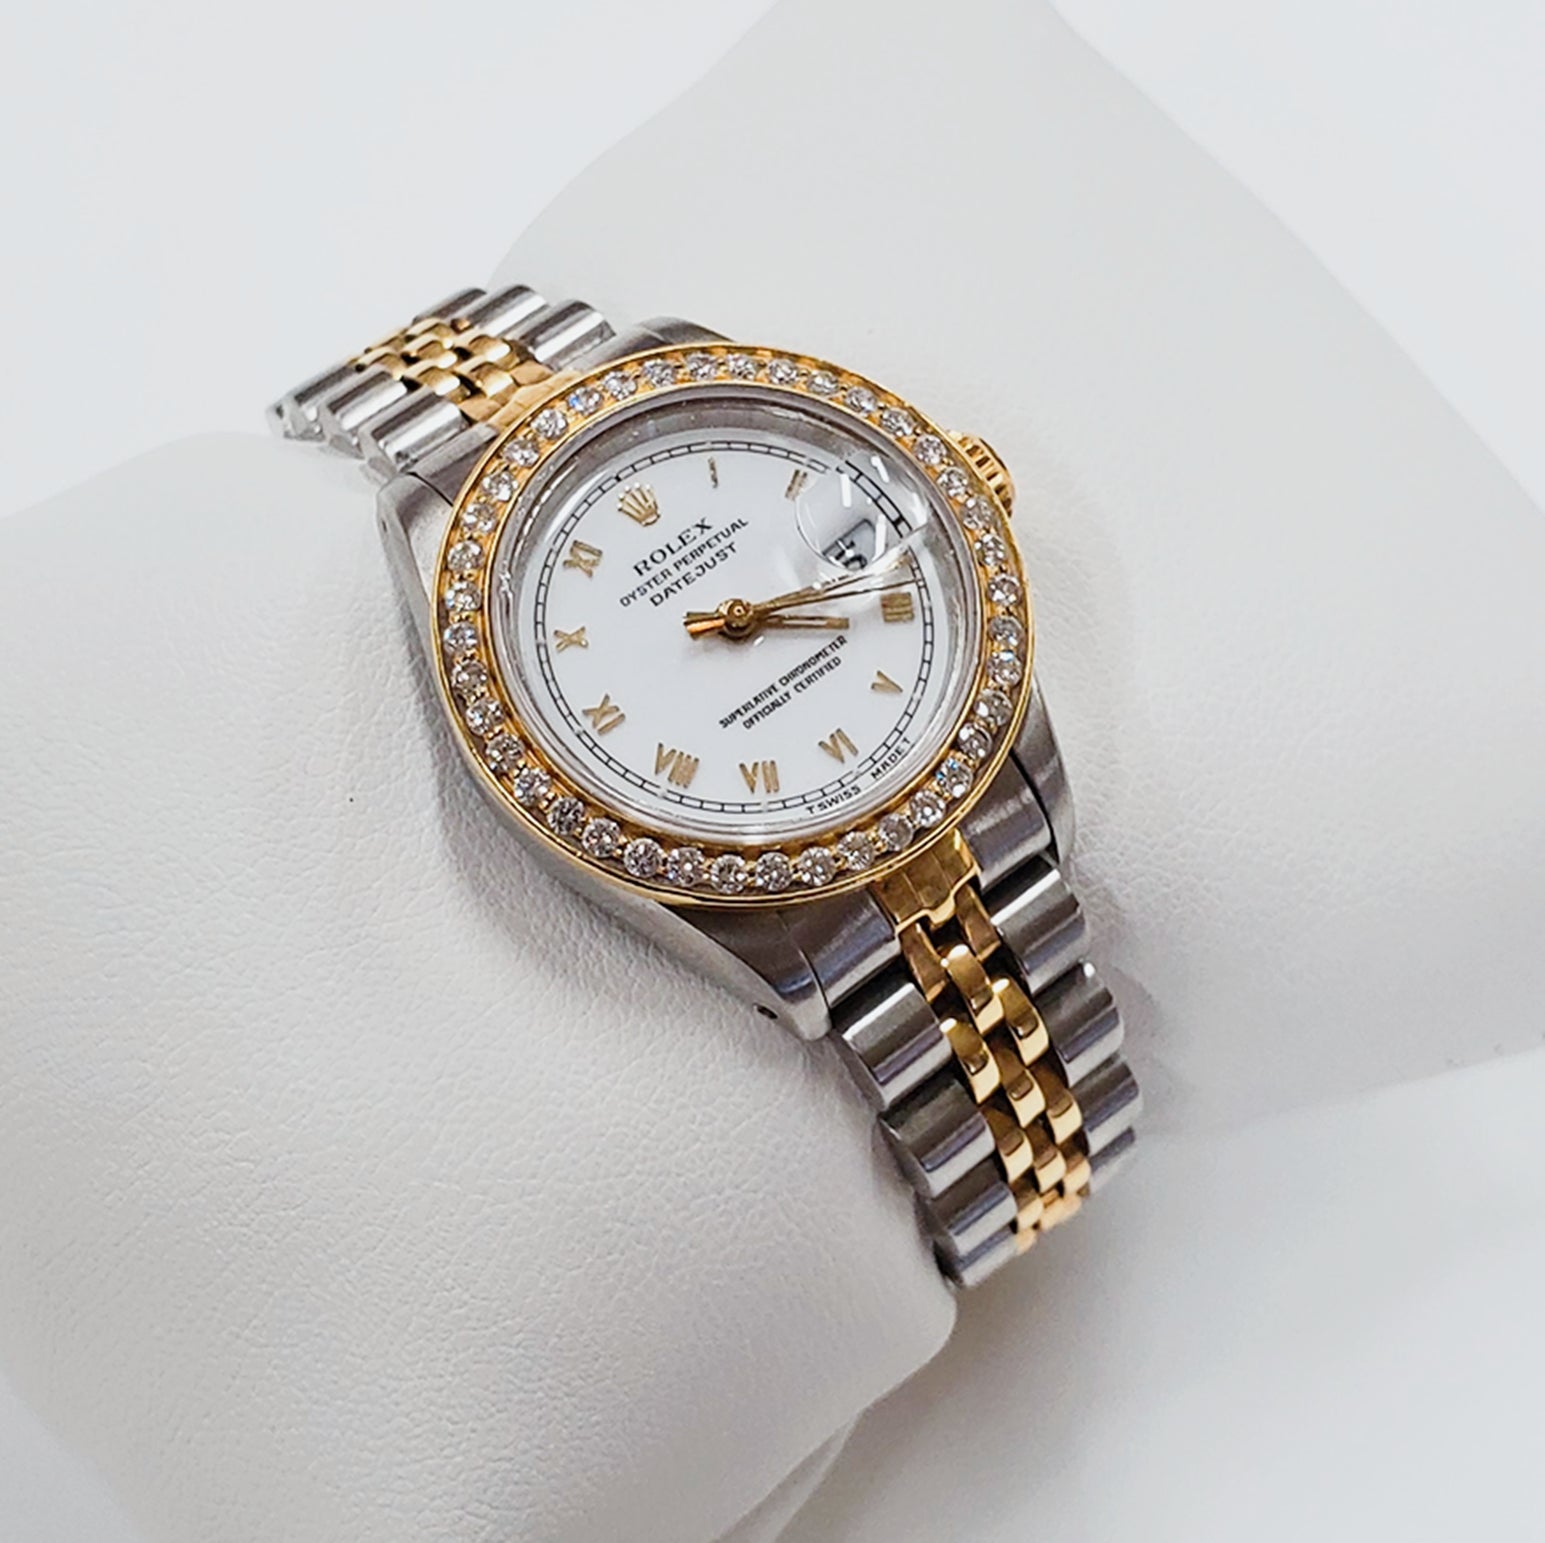 Ladies Rolex 18K Gold Two Tone 26mm DateJust Watch with Roman Numerals, White Dial and Diamond Bezel. (Pre-Owned)